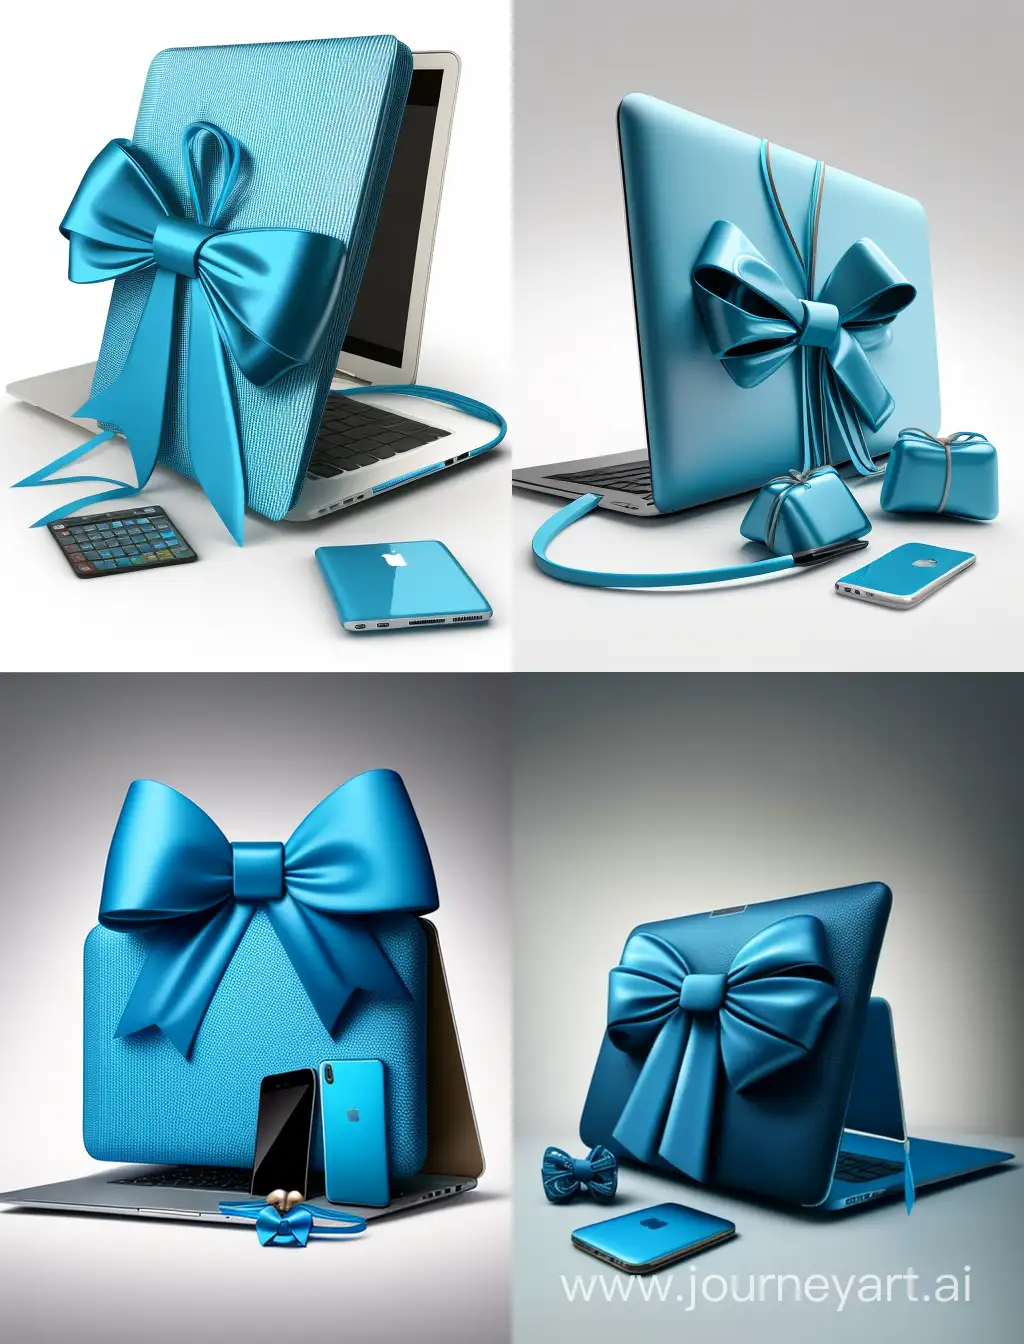 Professional-Workspace-Essentials-Laptop-Mobile-Phone-and-Name-Tag-in-a-Blue-Bow